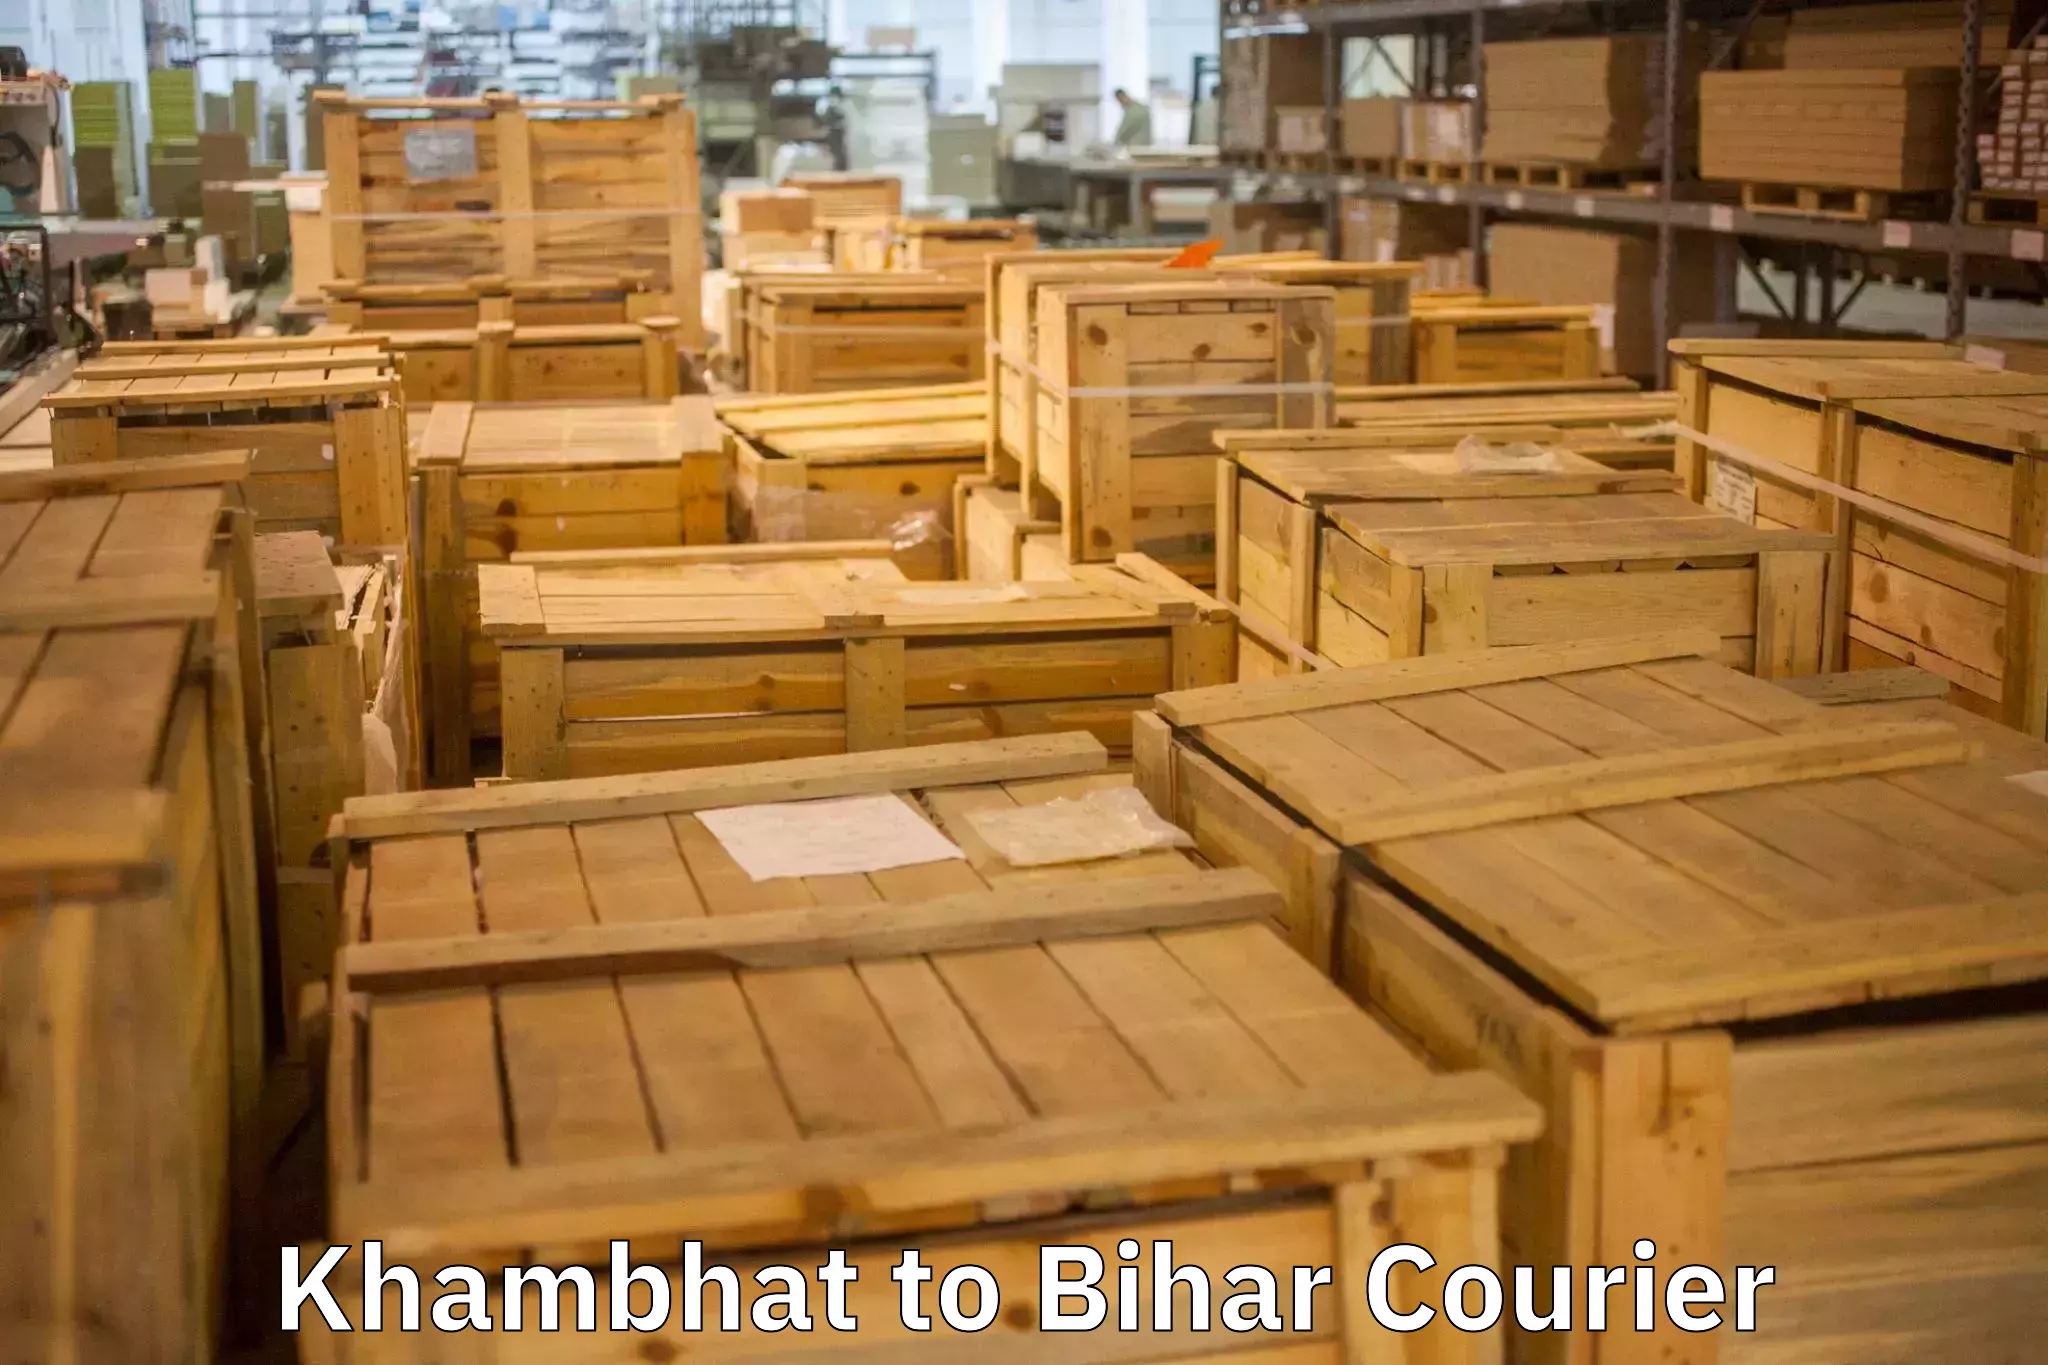 Furniture transport specialists Khambhat to Bankipore